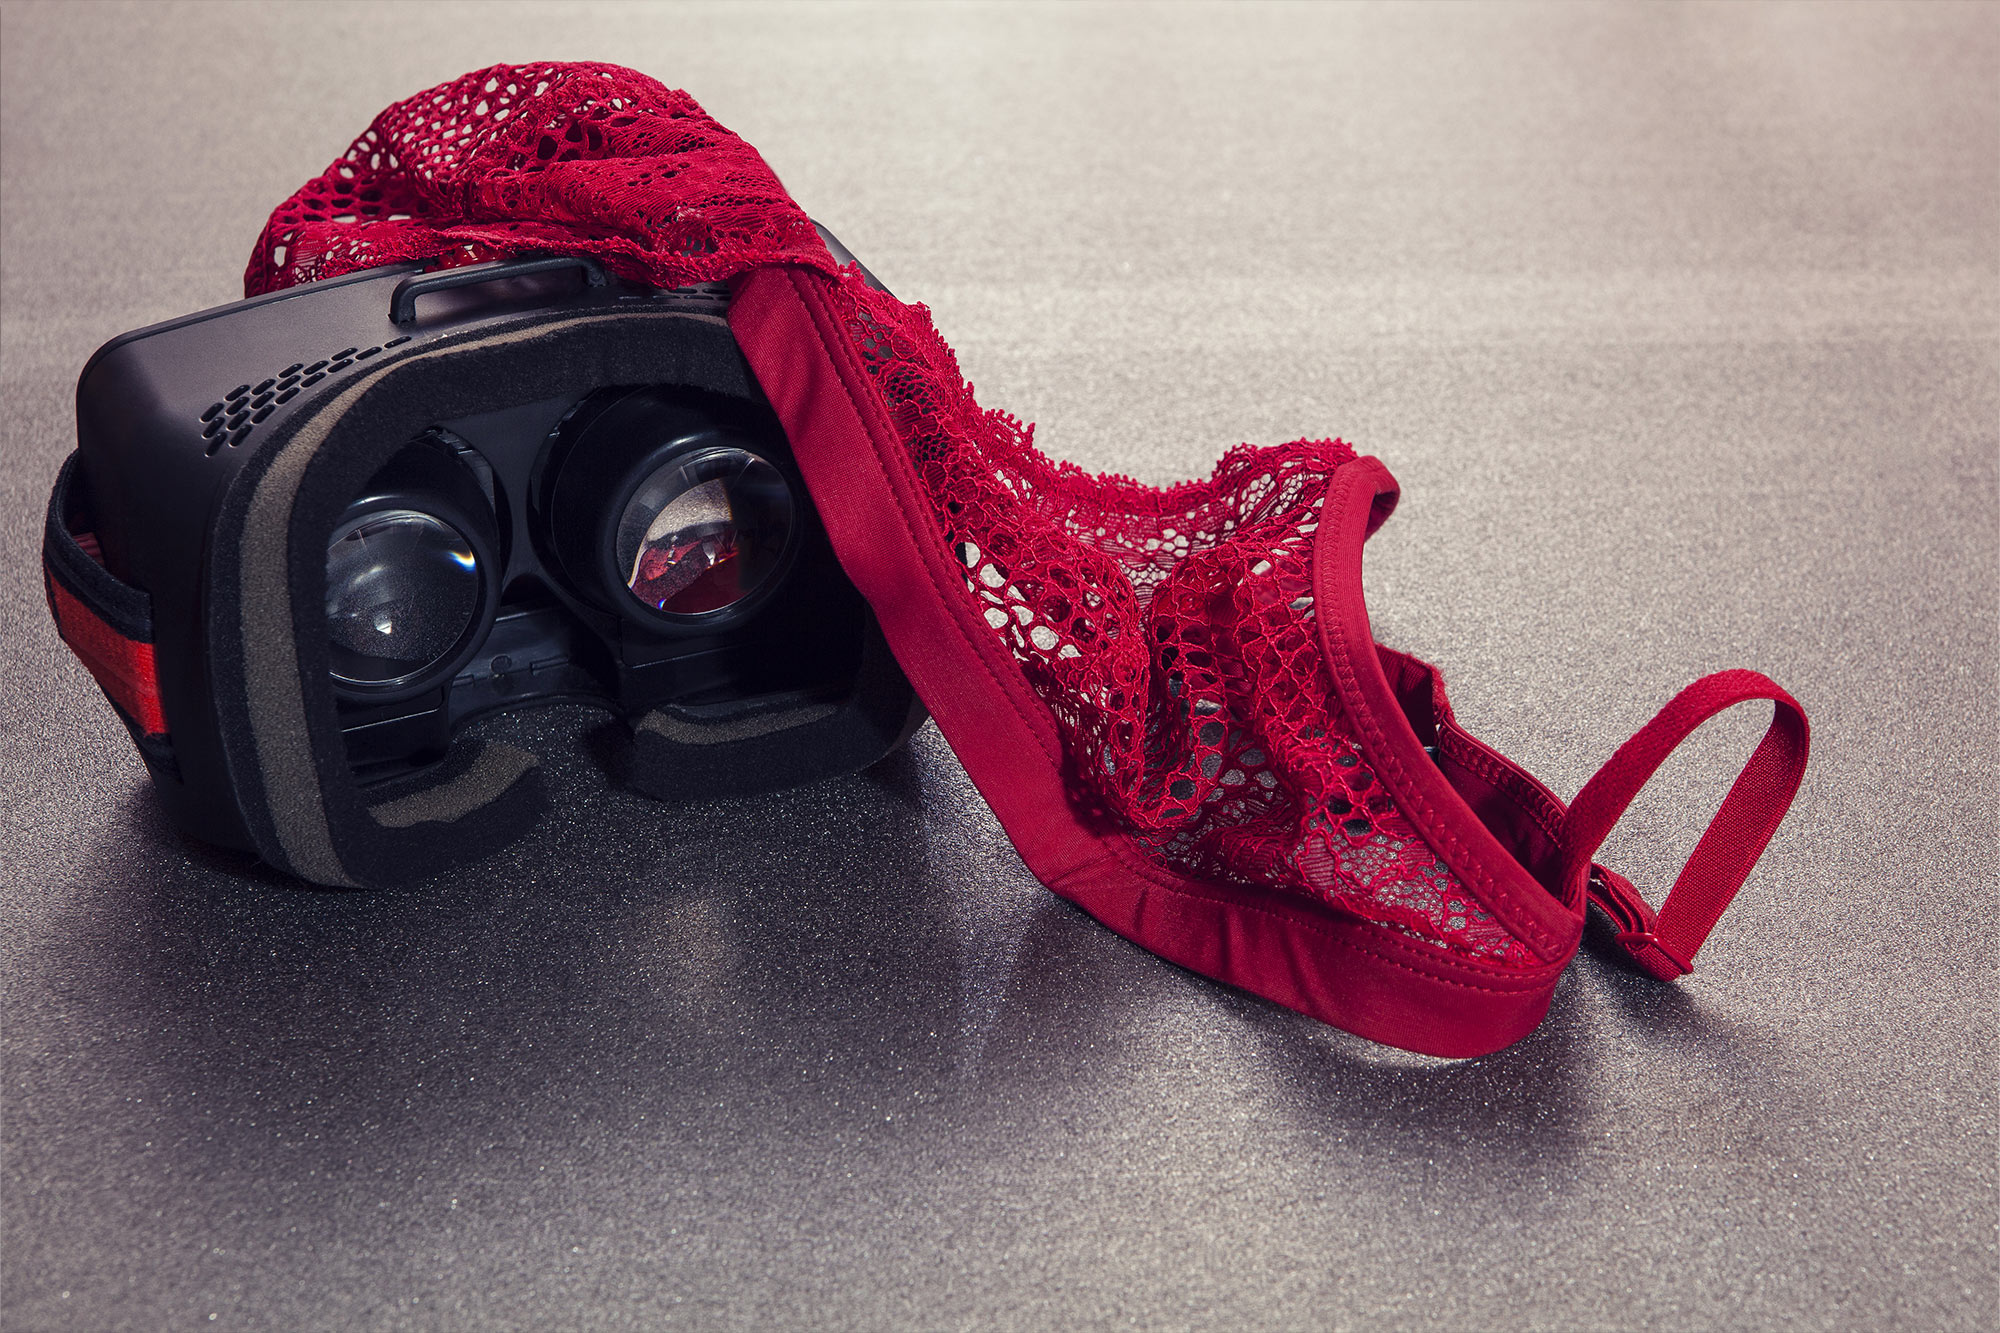 Black VR headset on the ground with red lace lingerie thrown on top of it.